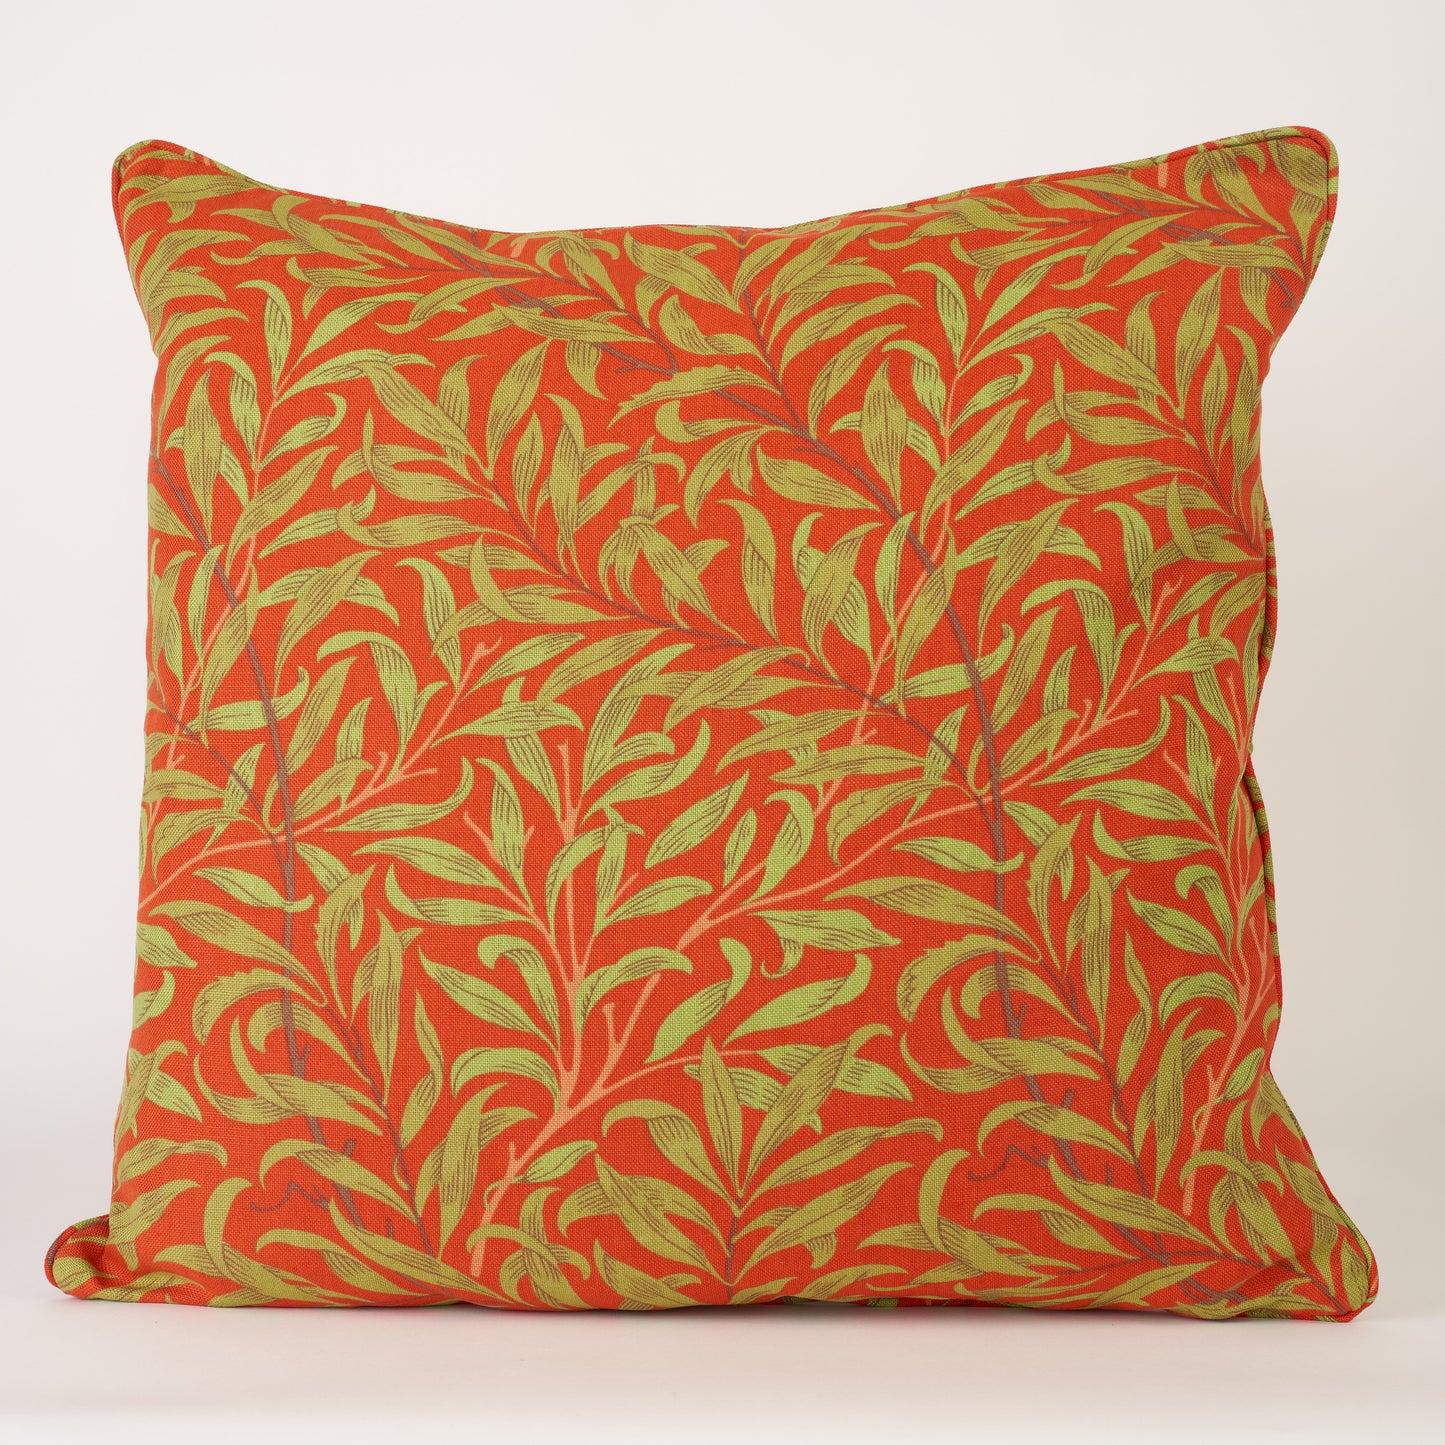 Willow Bough Cushion - Tomato/Olive